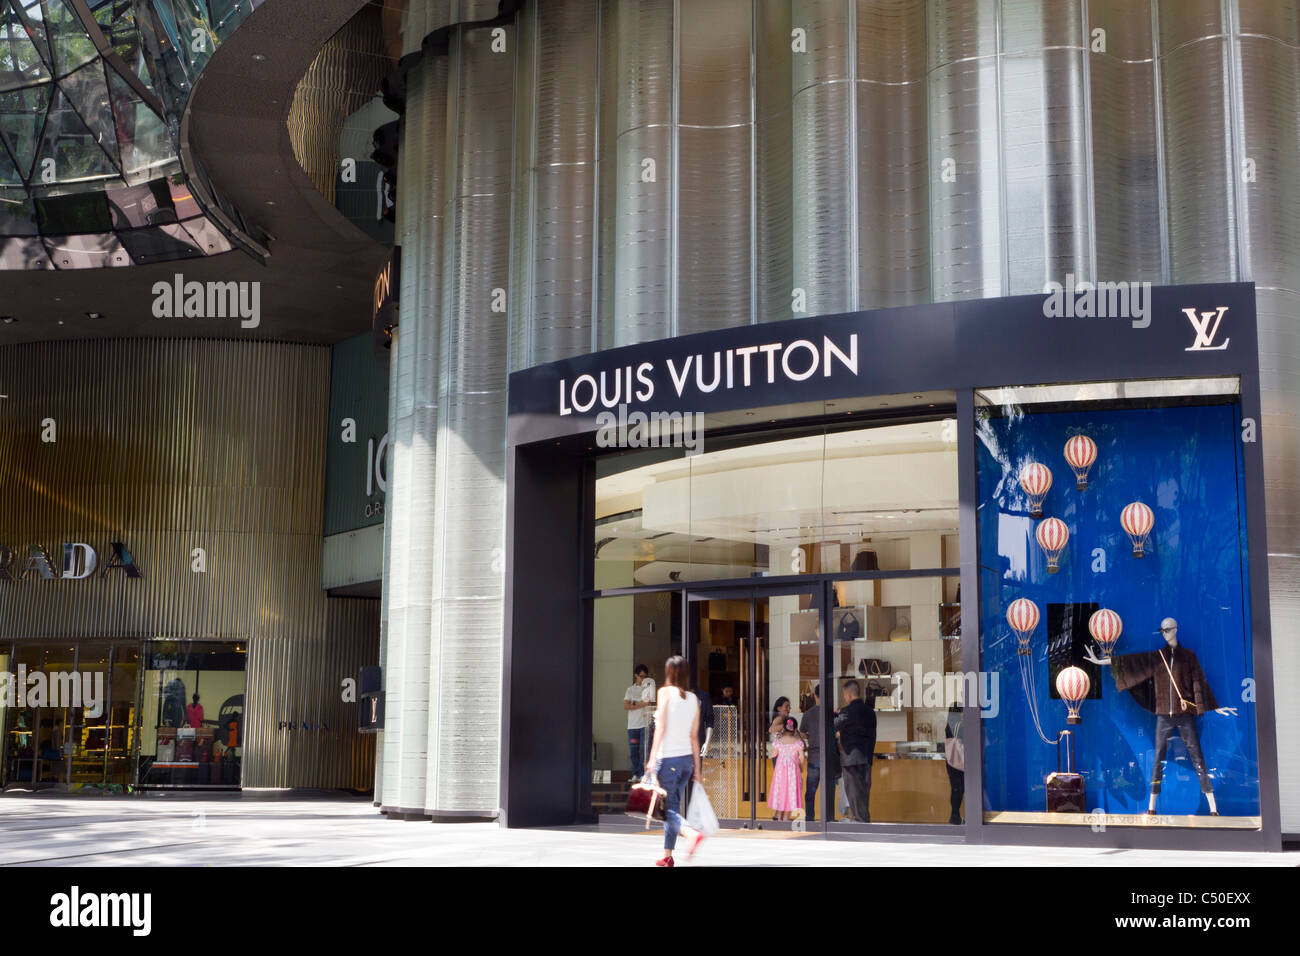 Photo Louis Vuitton, LV stores in Orchard Road, Singapore Image #3352966